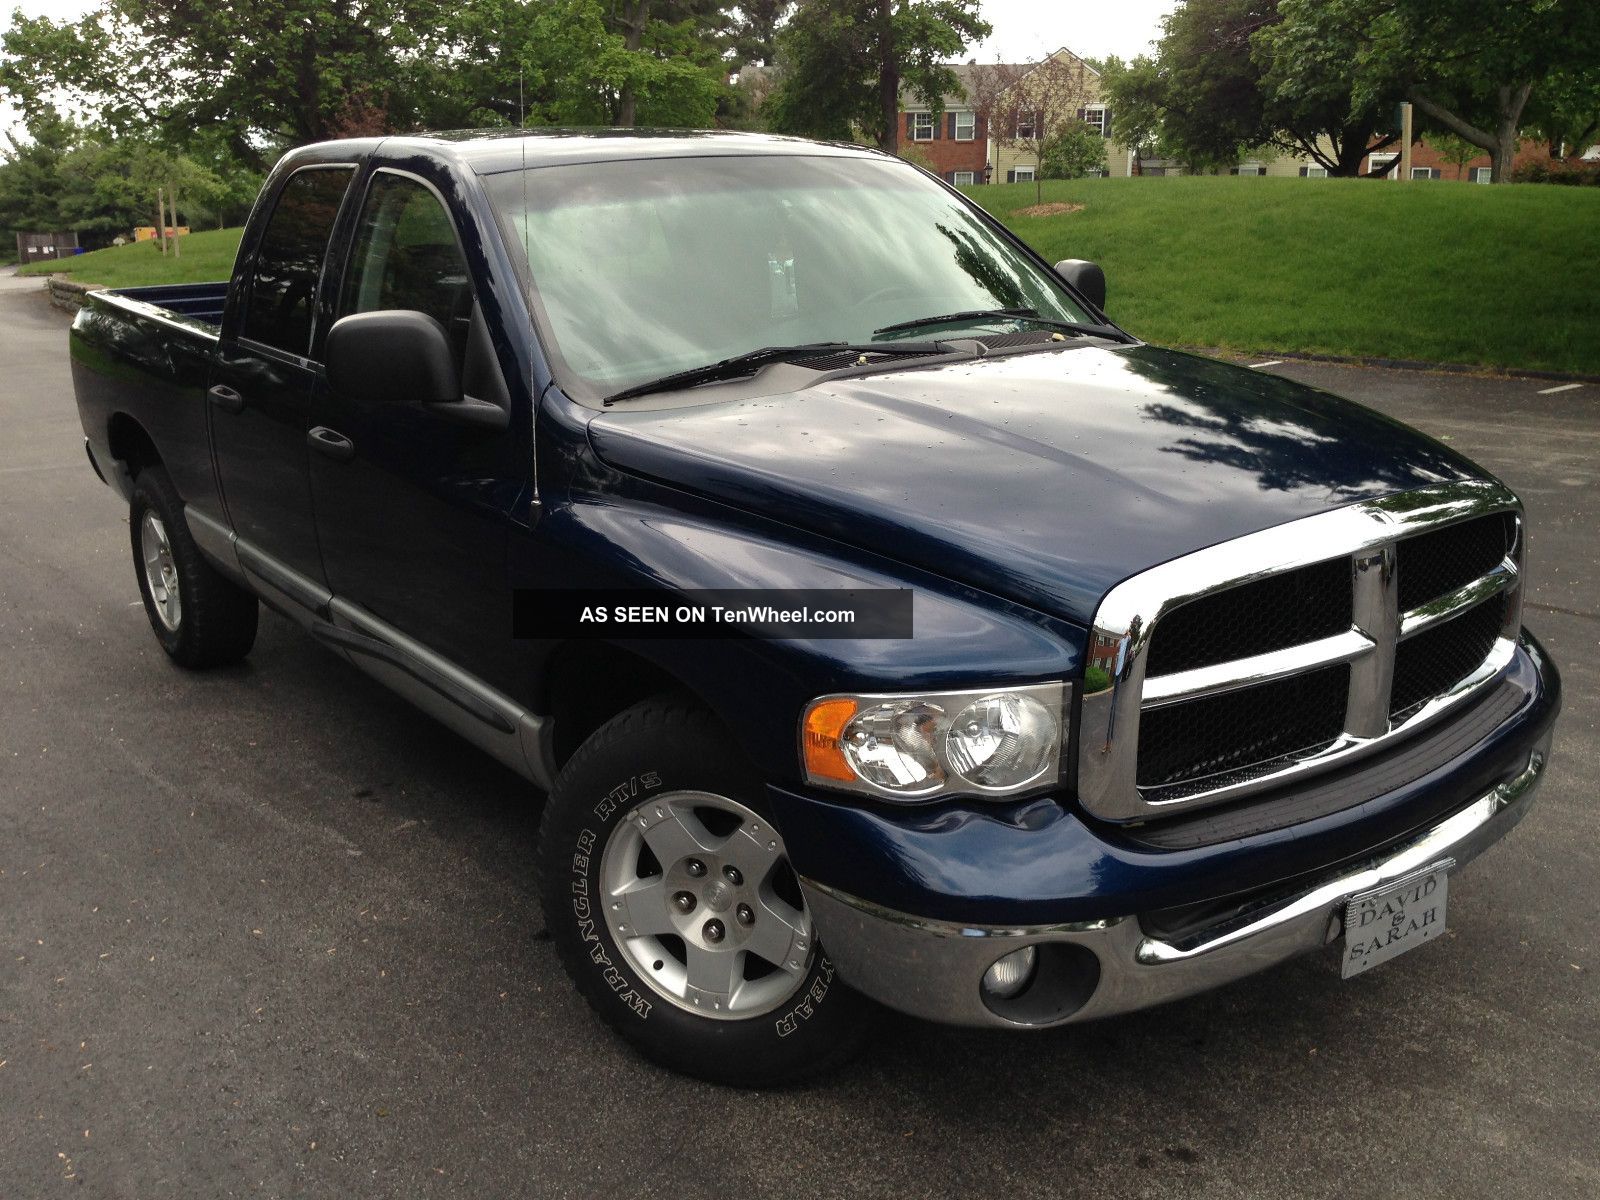 Ronnie S Towing Service: 2007 Dodge Ram 1500 5 7 Hemi Towing Capacity 2007 Dodge Ram Pickup 1500 Towing Capacity